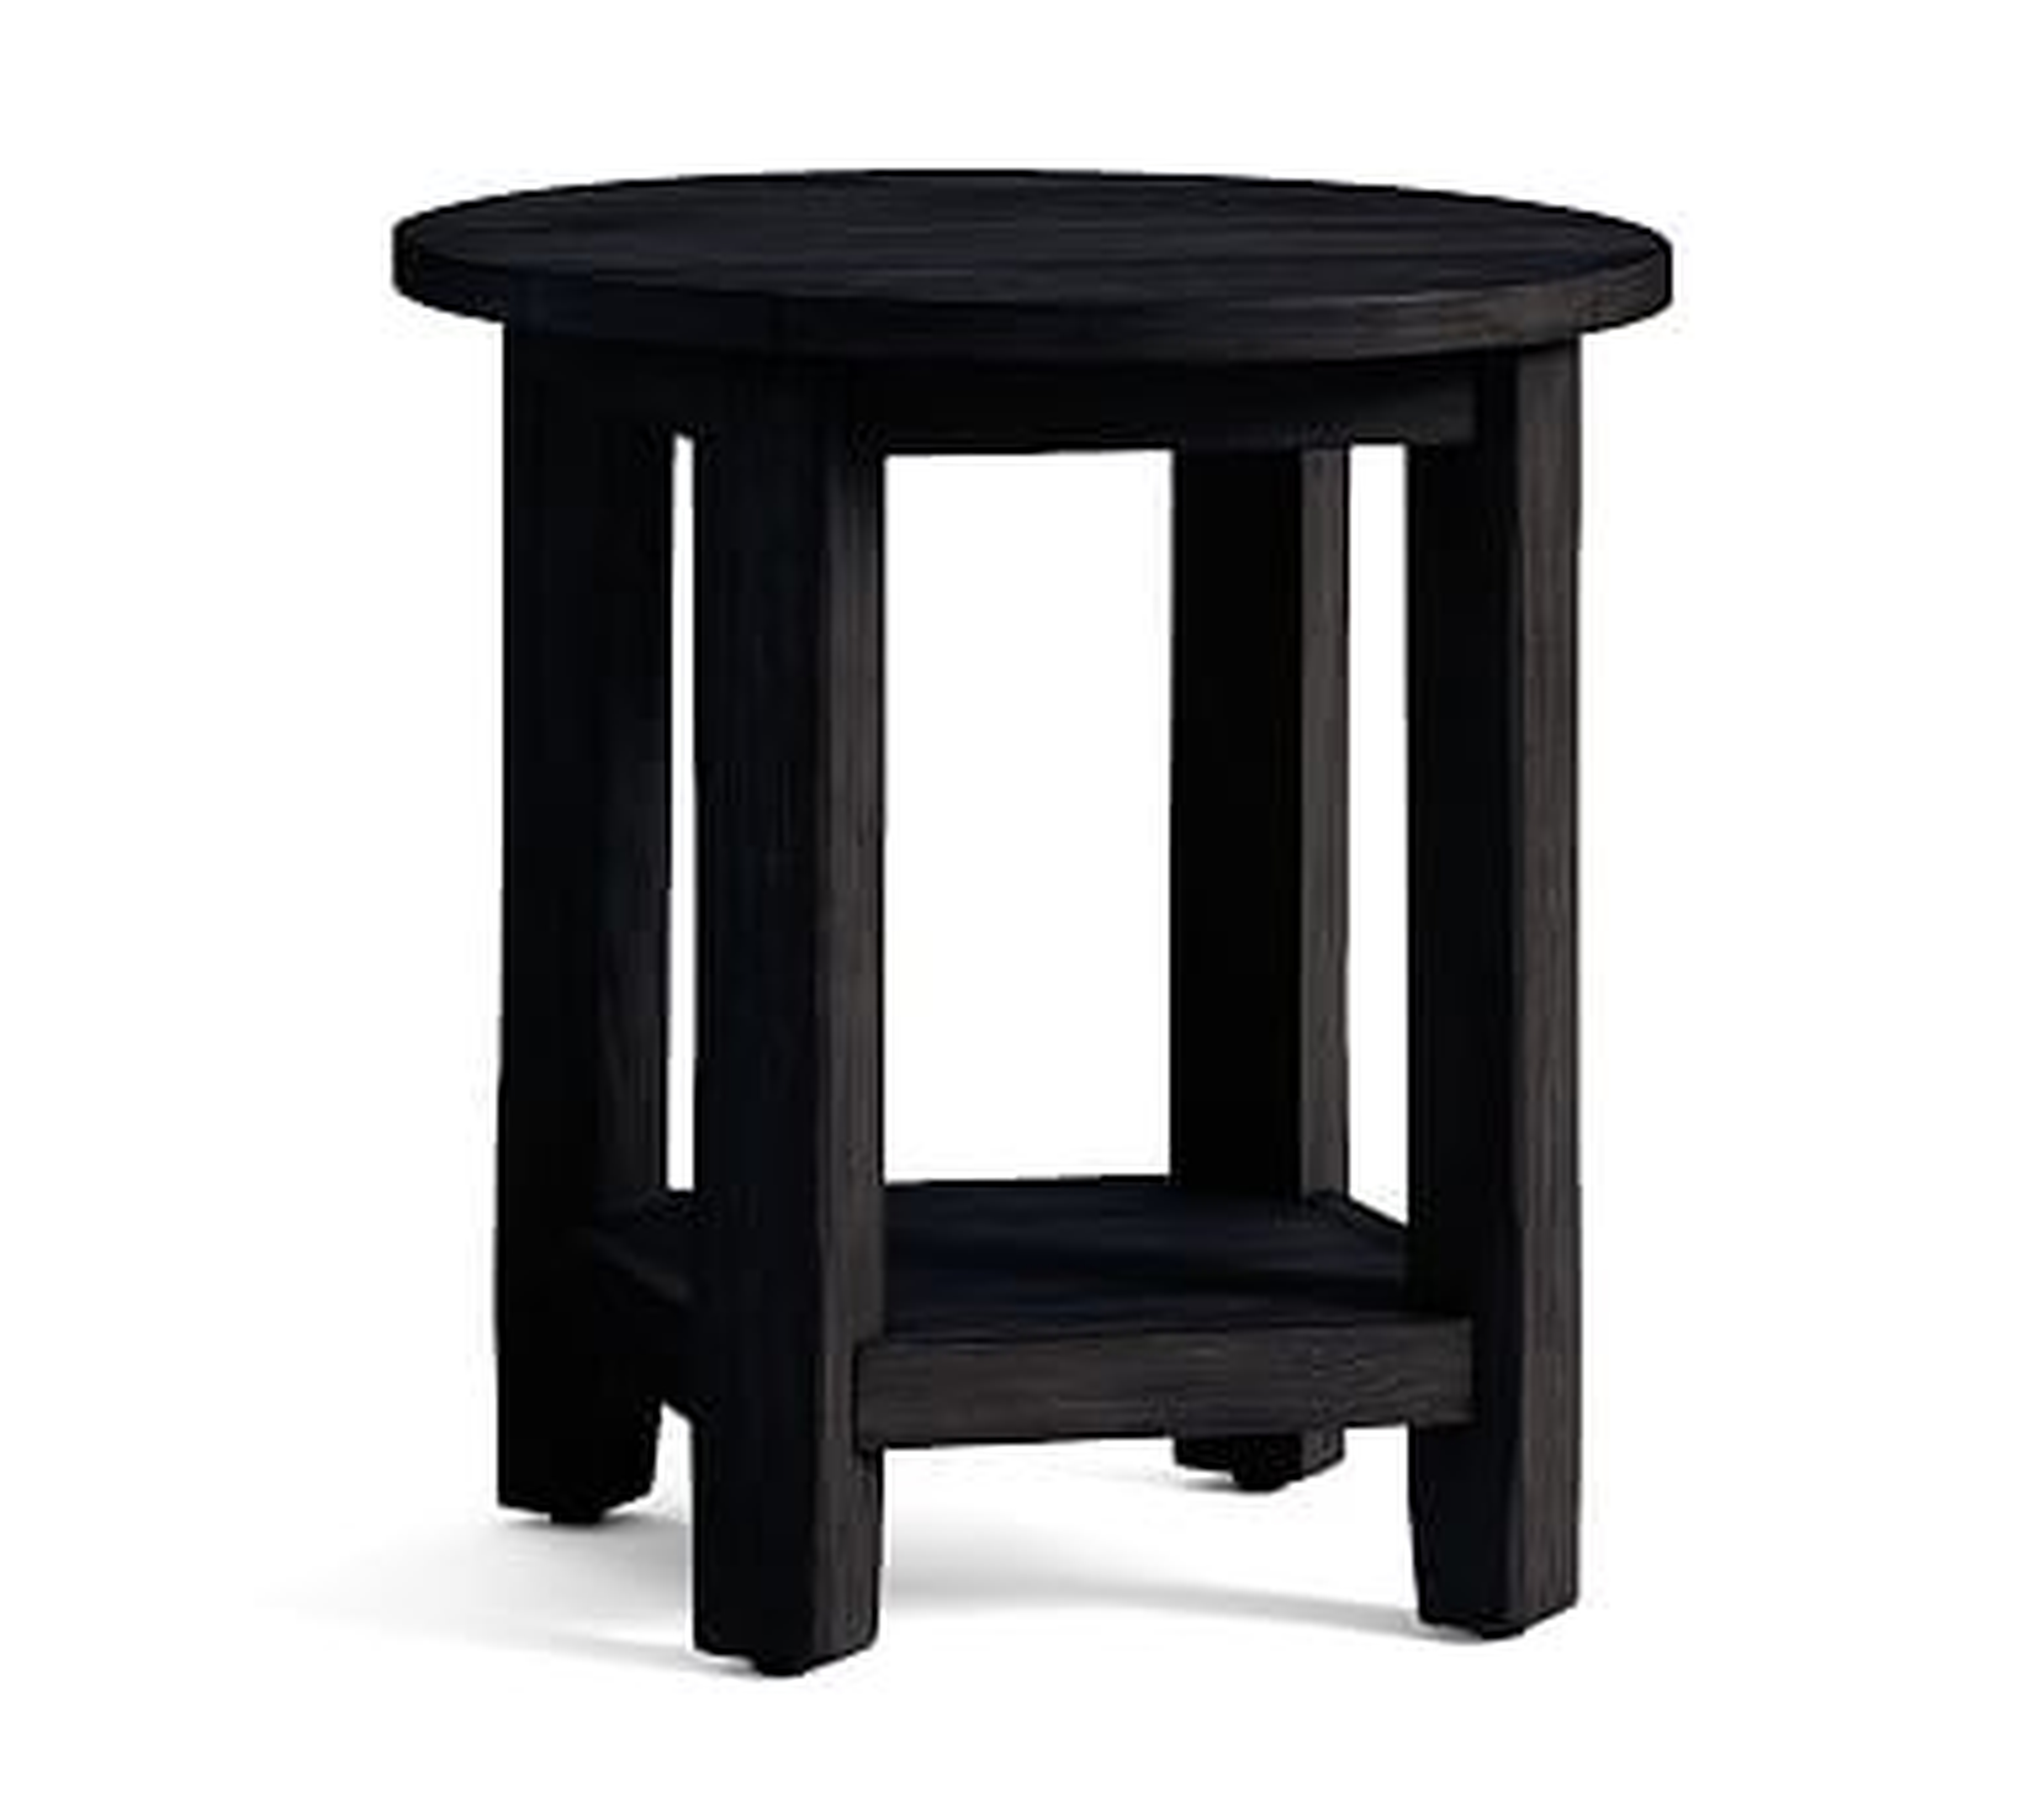 Benchwright Round End Table, Blackened Oak - Pottery Barn